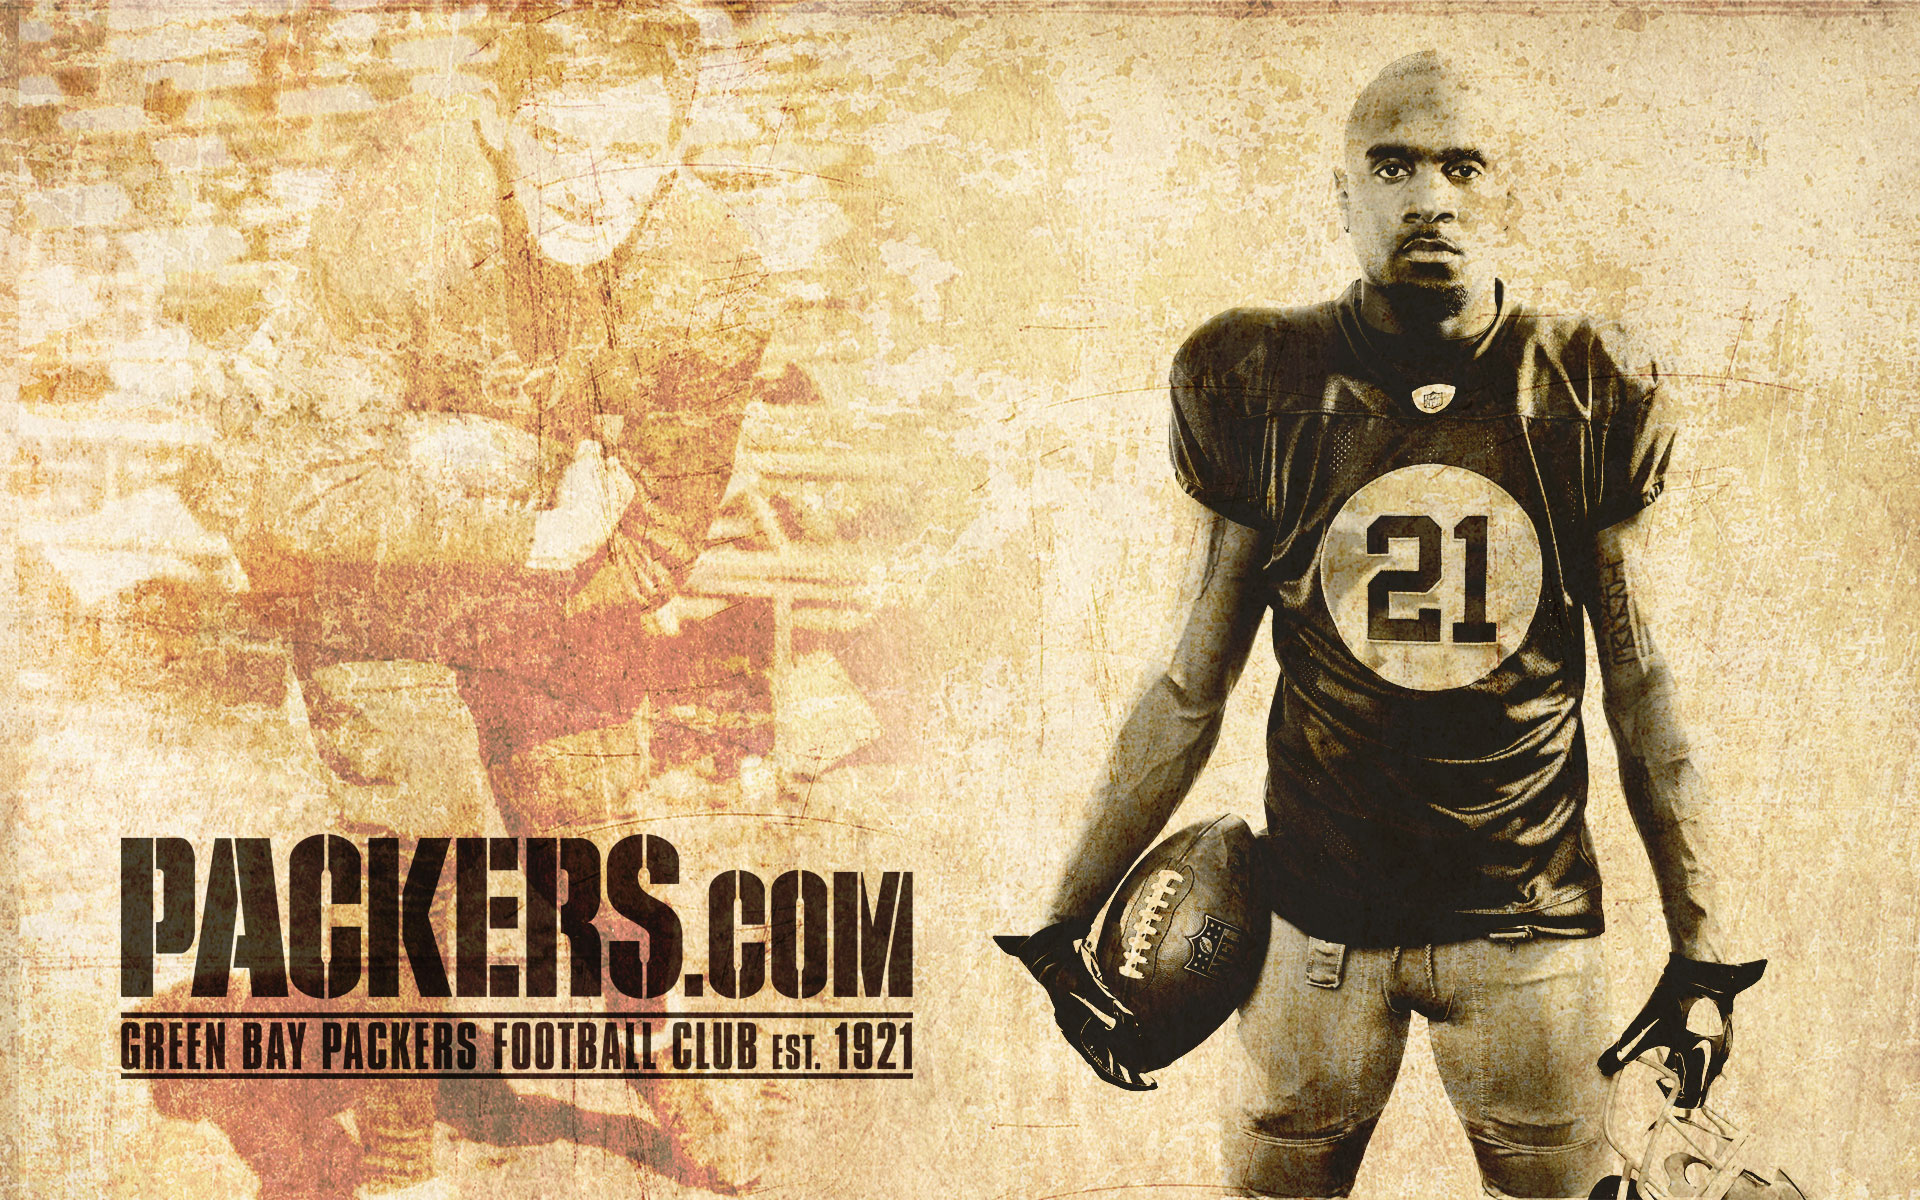 Packers.com Wallpapers 2010 Miscellaneous